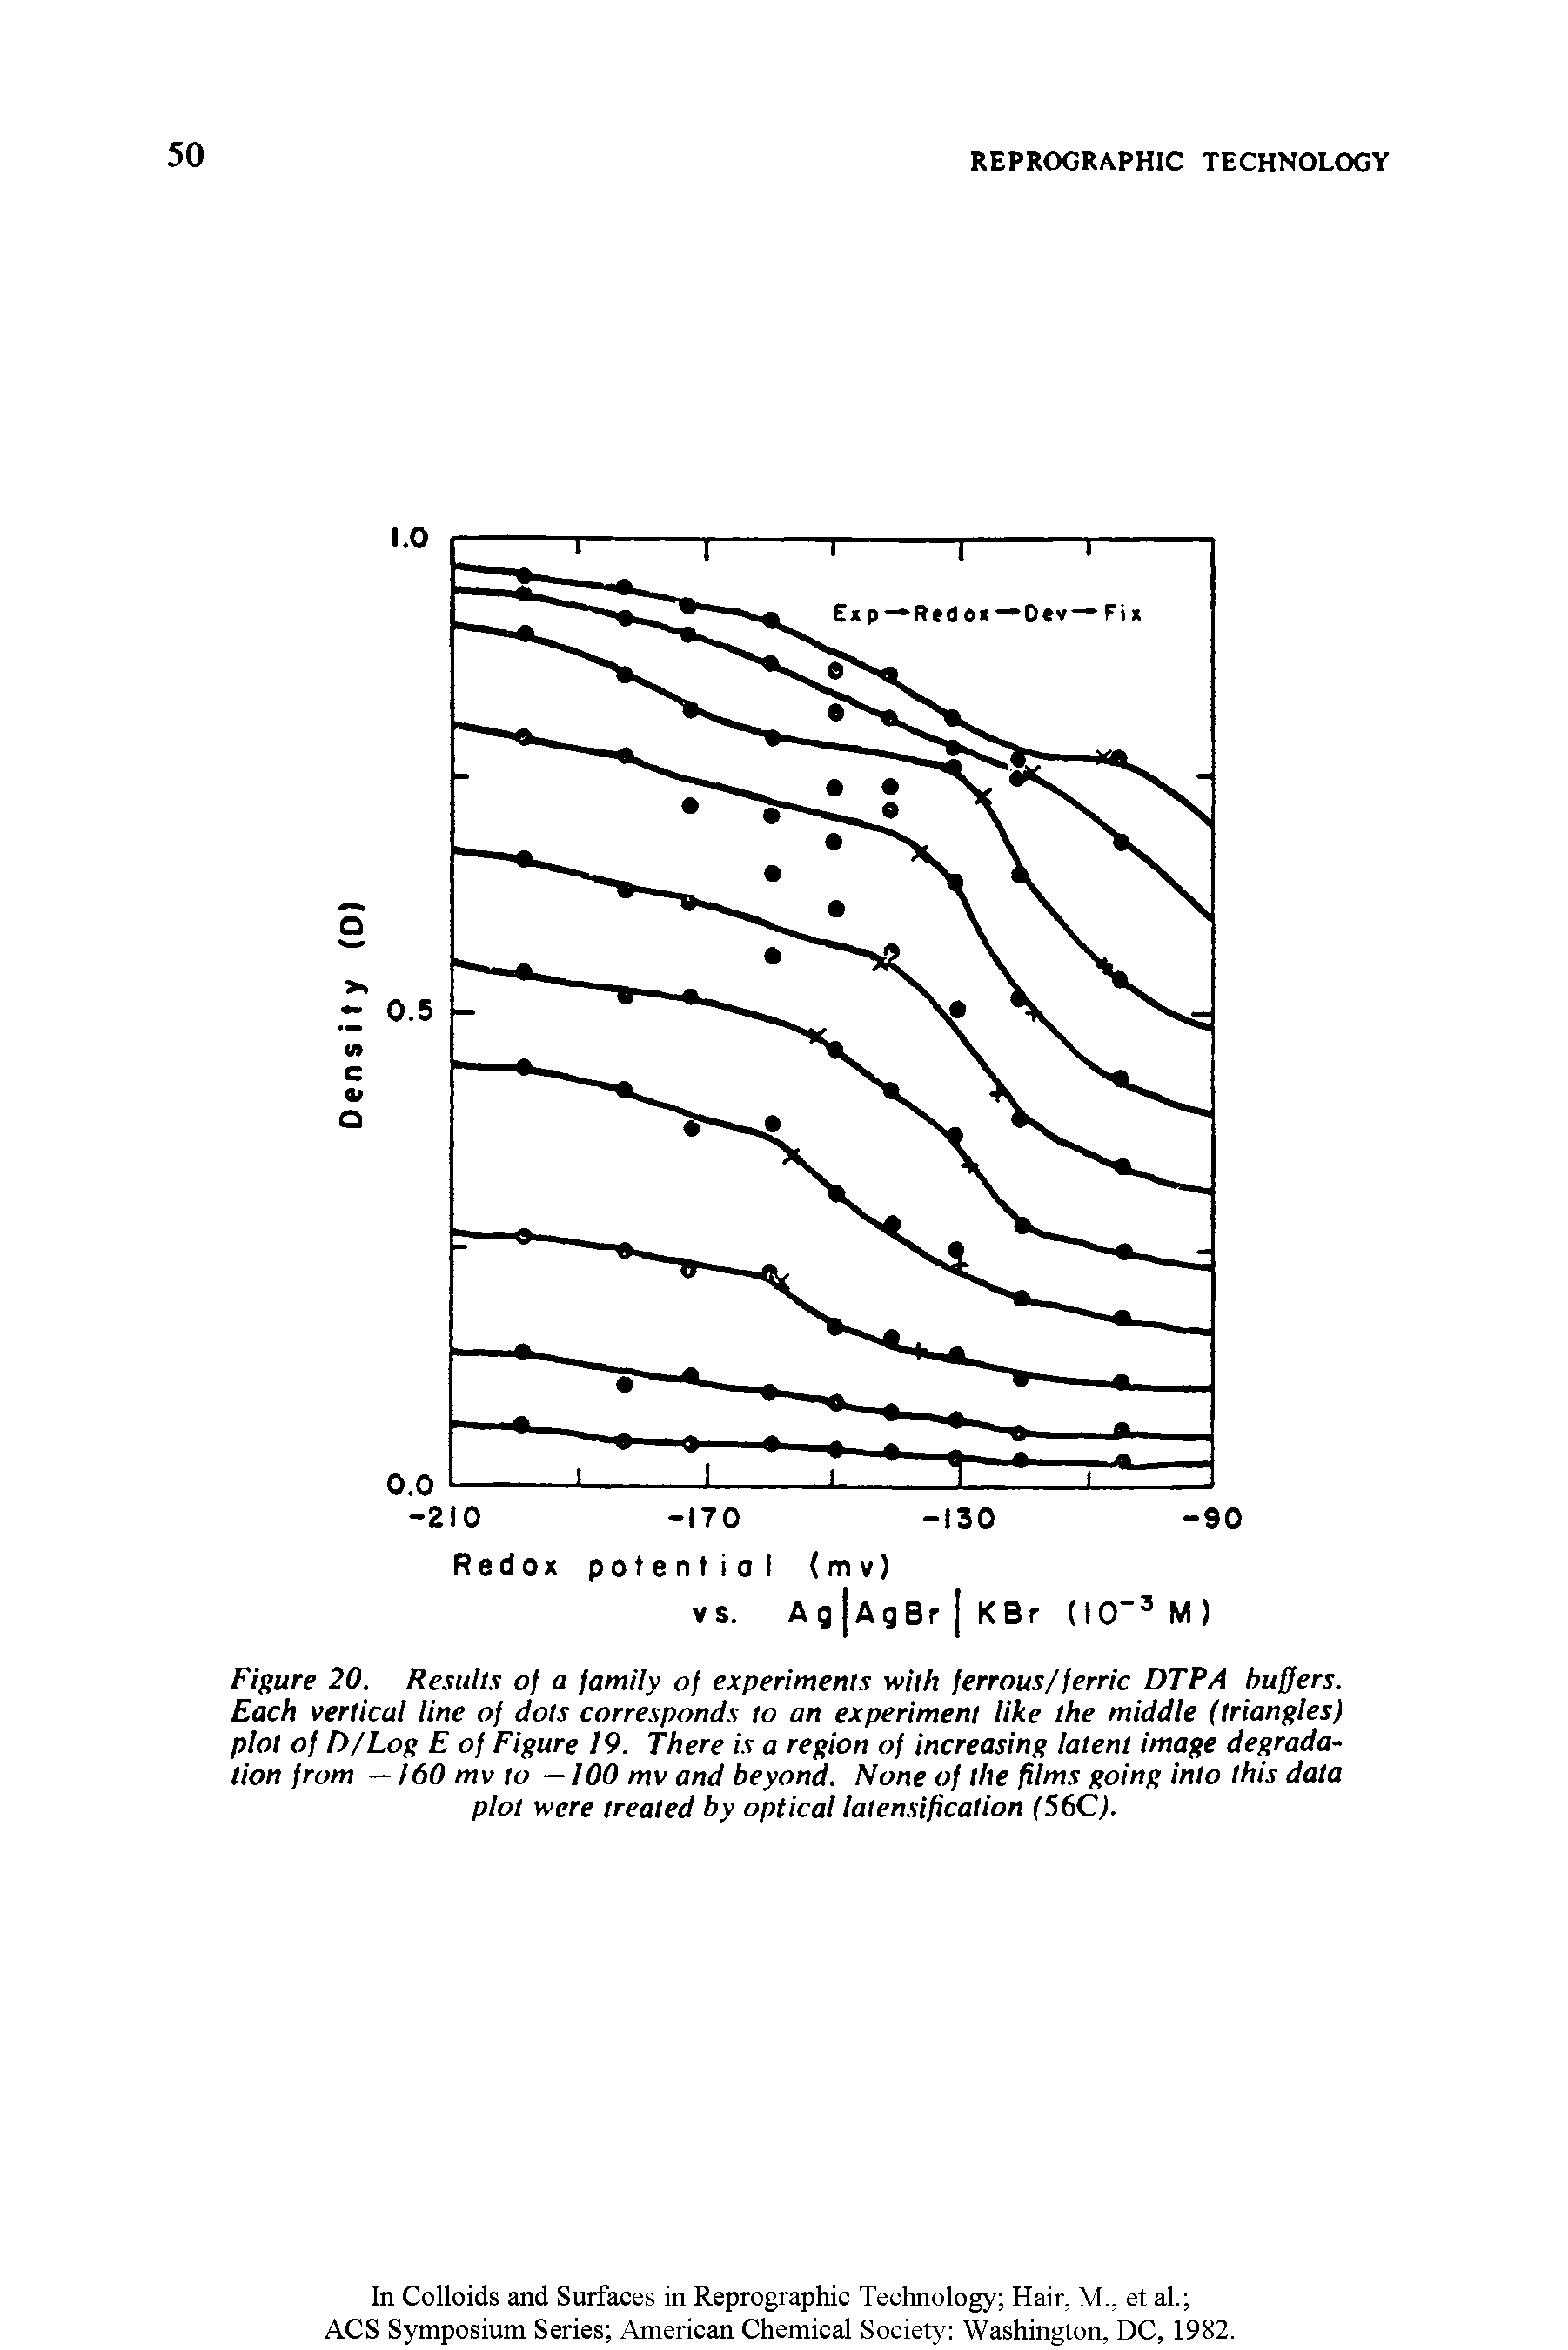 Figure 20. Results of a family of experiments with ferrous/ferric DTPA buffers. Each vertical line of dots corresponds to an experiment like the middle (triangles) plot of D/Log E of Figure 19. There is a region of increasing latent image degradation from —160 mv to —100 mv and beyond. None of the films going into this data plot were treated by optical latensificalion (56C).